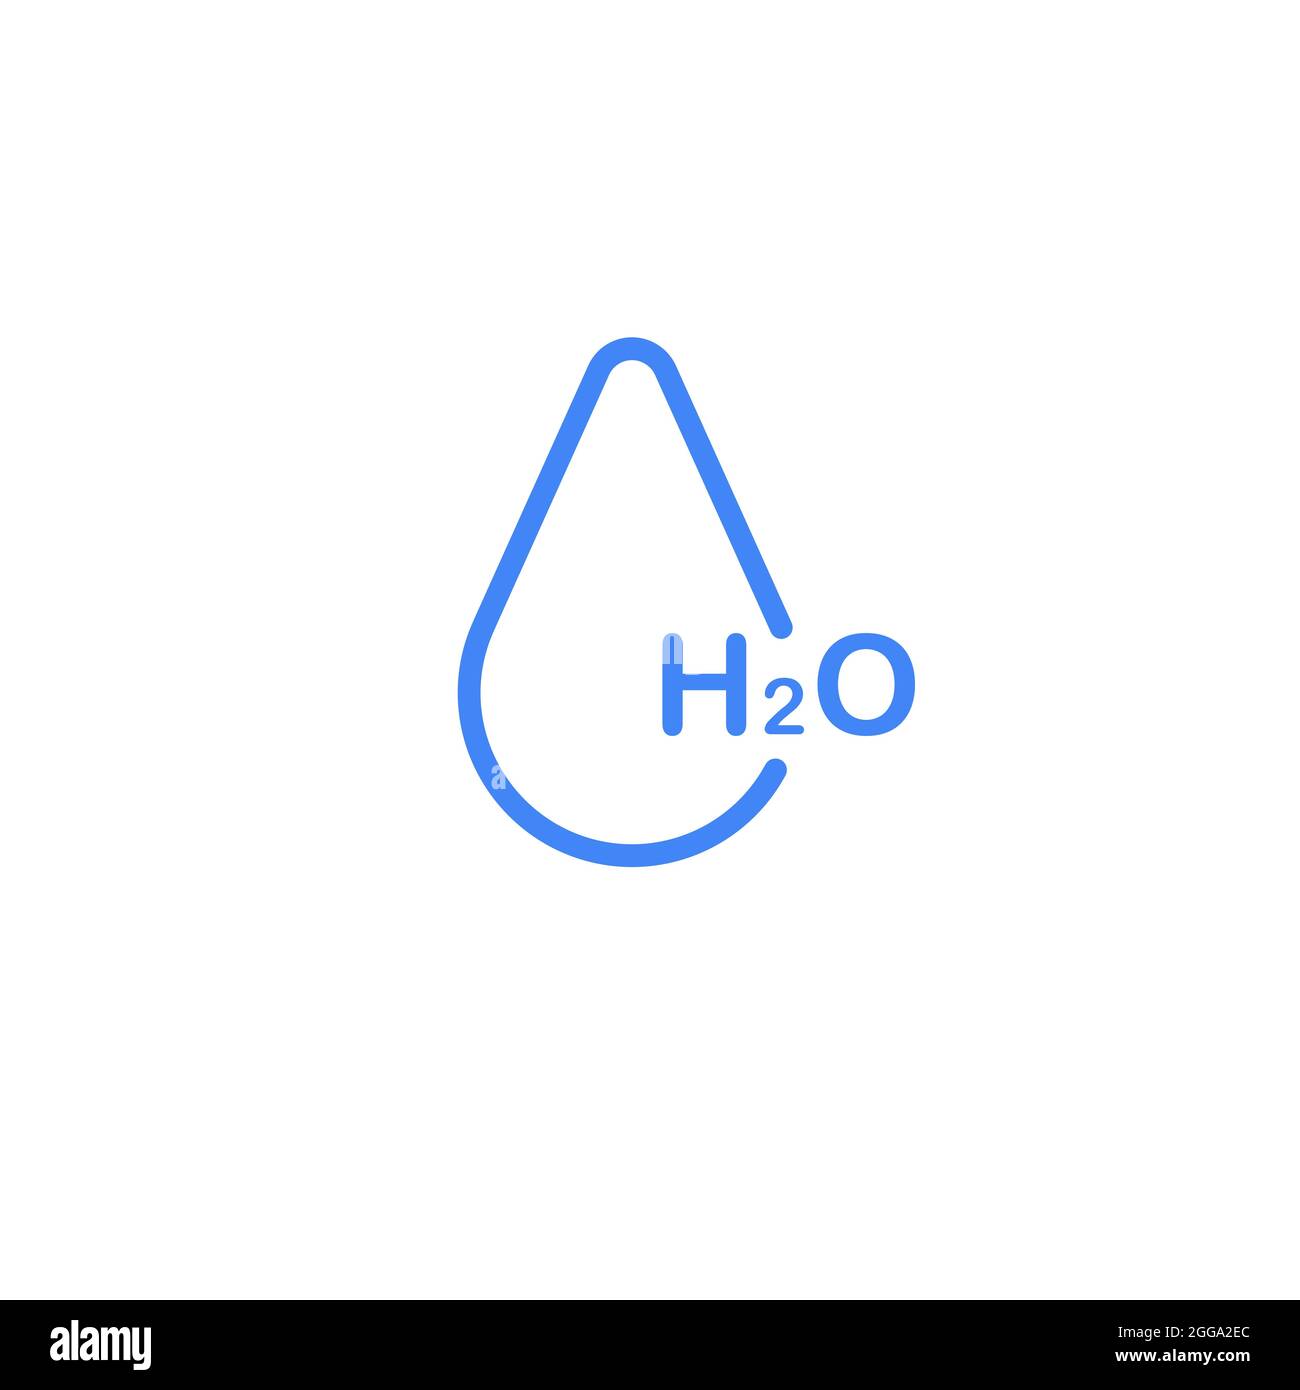 H2O water icon. Vector concept illustration for design. Stock Vector illustration isolated on white background. Stock Vector